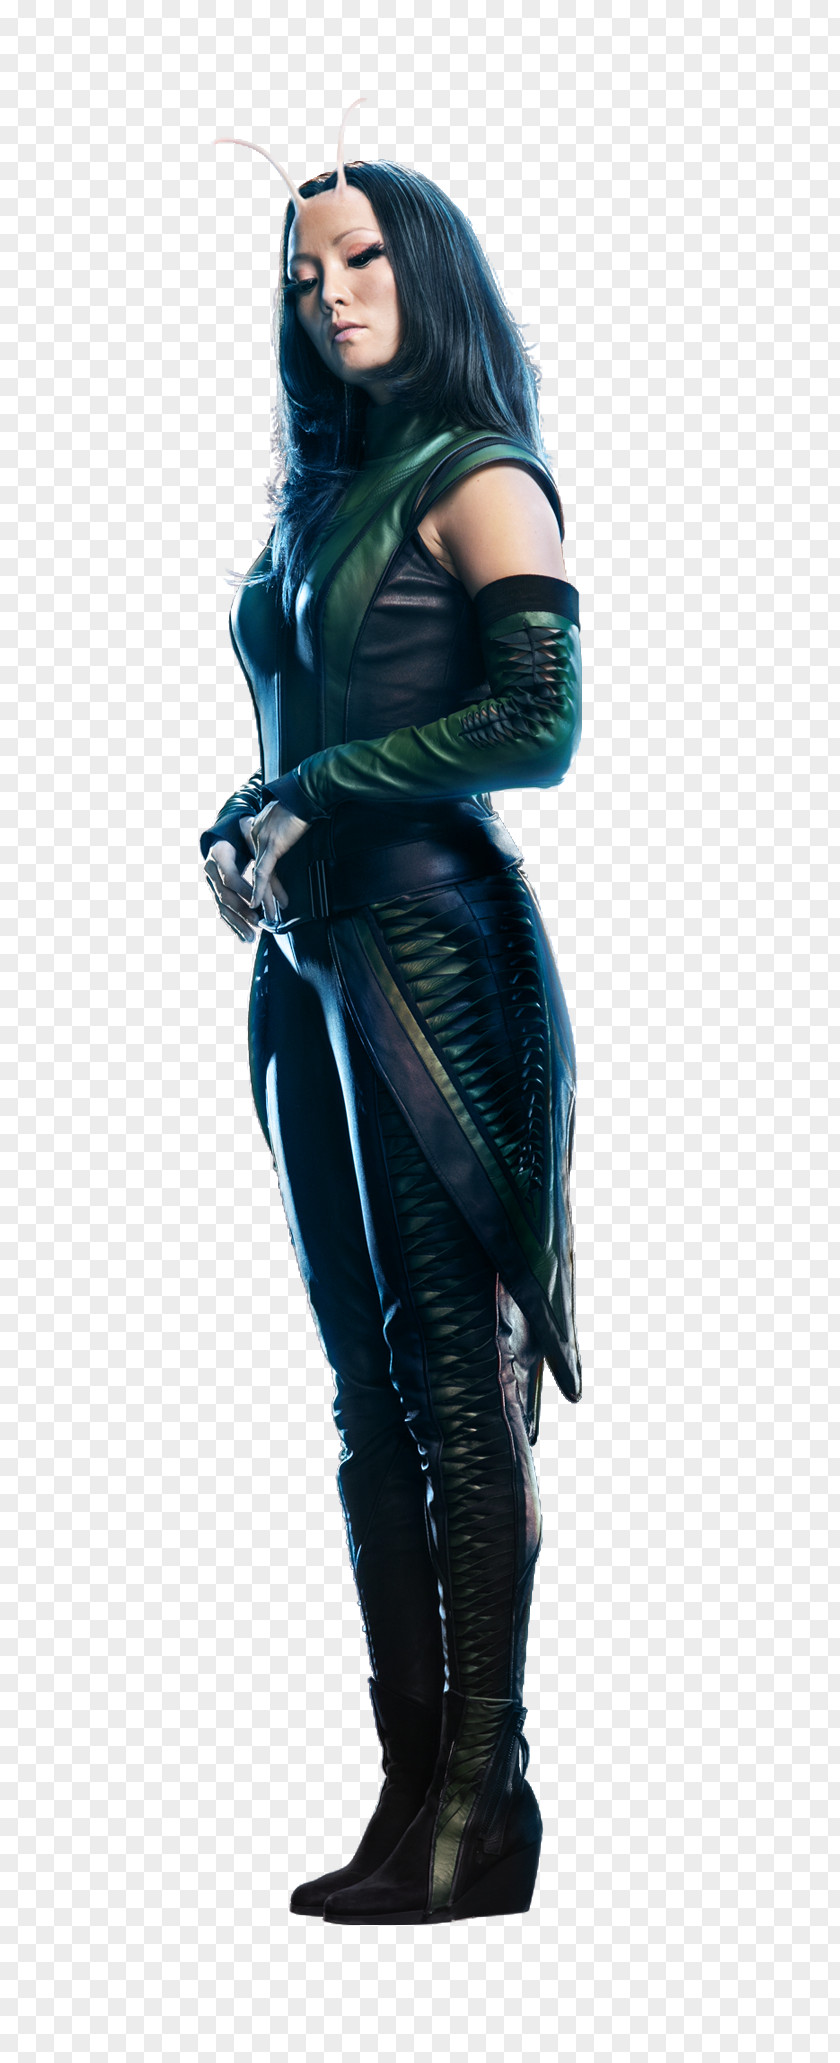 Mystique Mantis Guardians Of The Galaxy Vol. 2 Nebula Star-Lord YouTube PNG